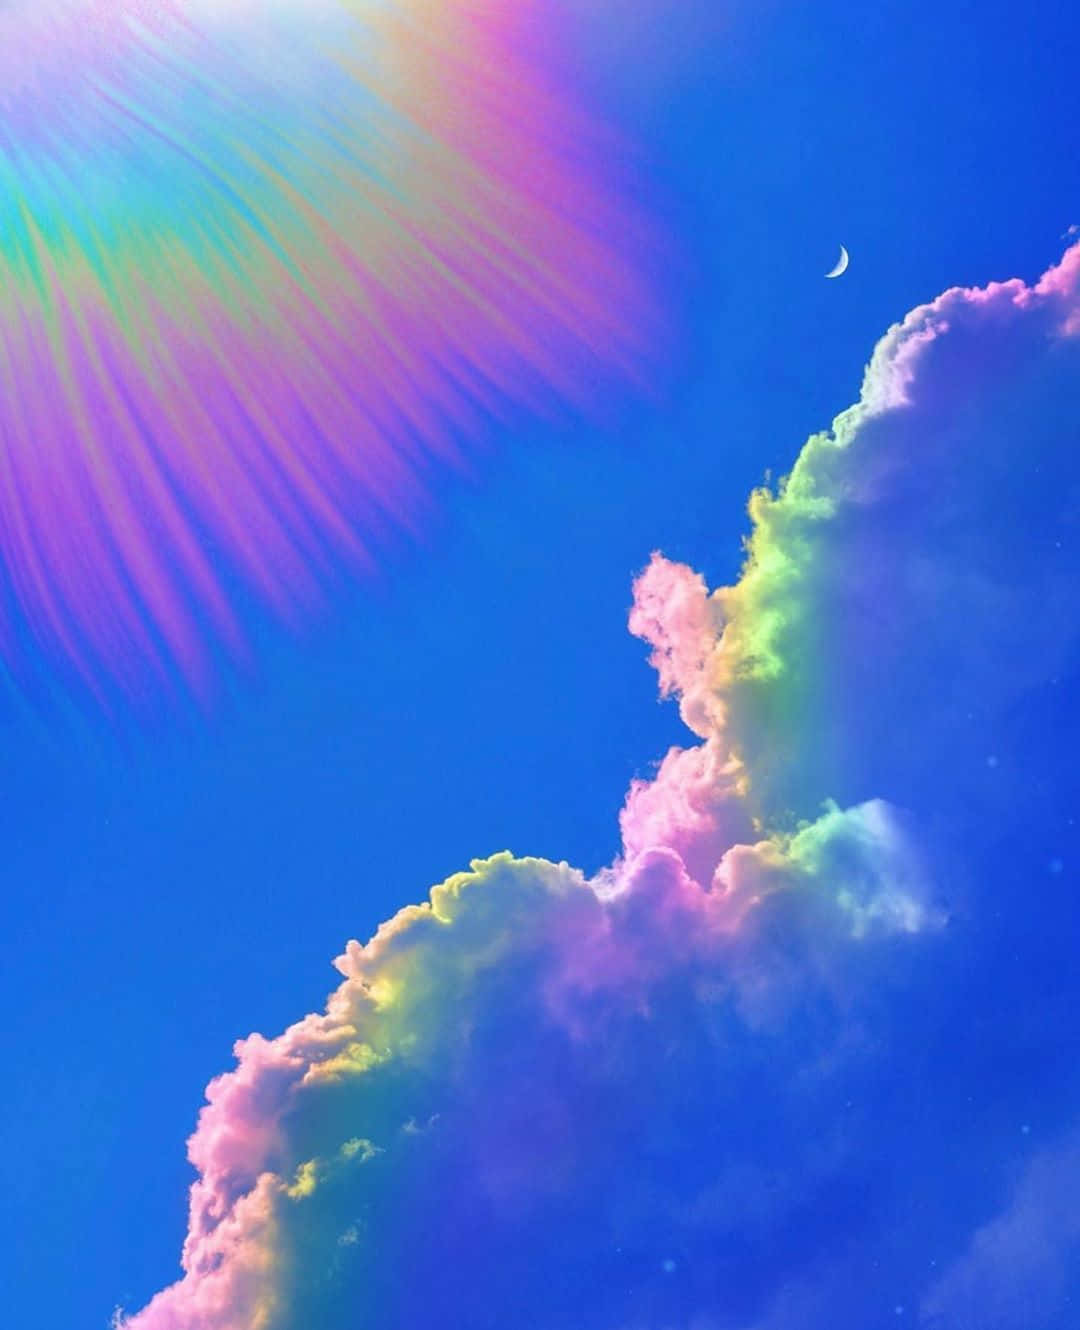 Sun Rays Over Trippy Aesthetic Cloud Wallpaper